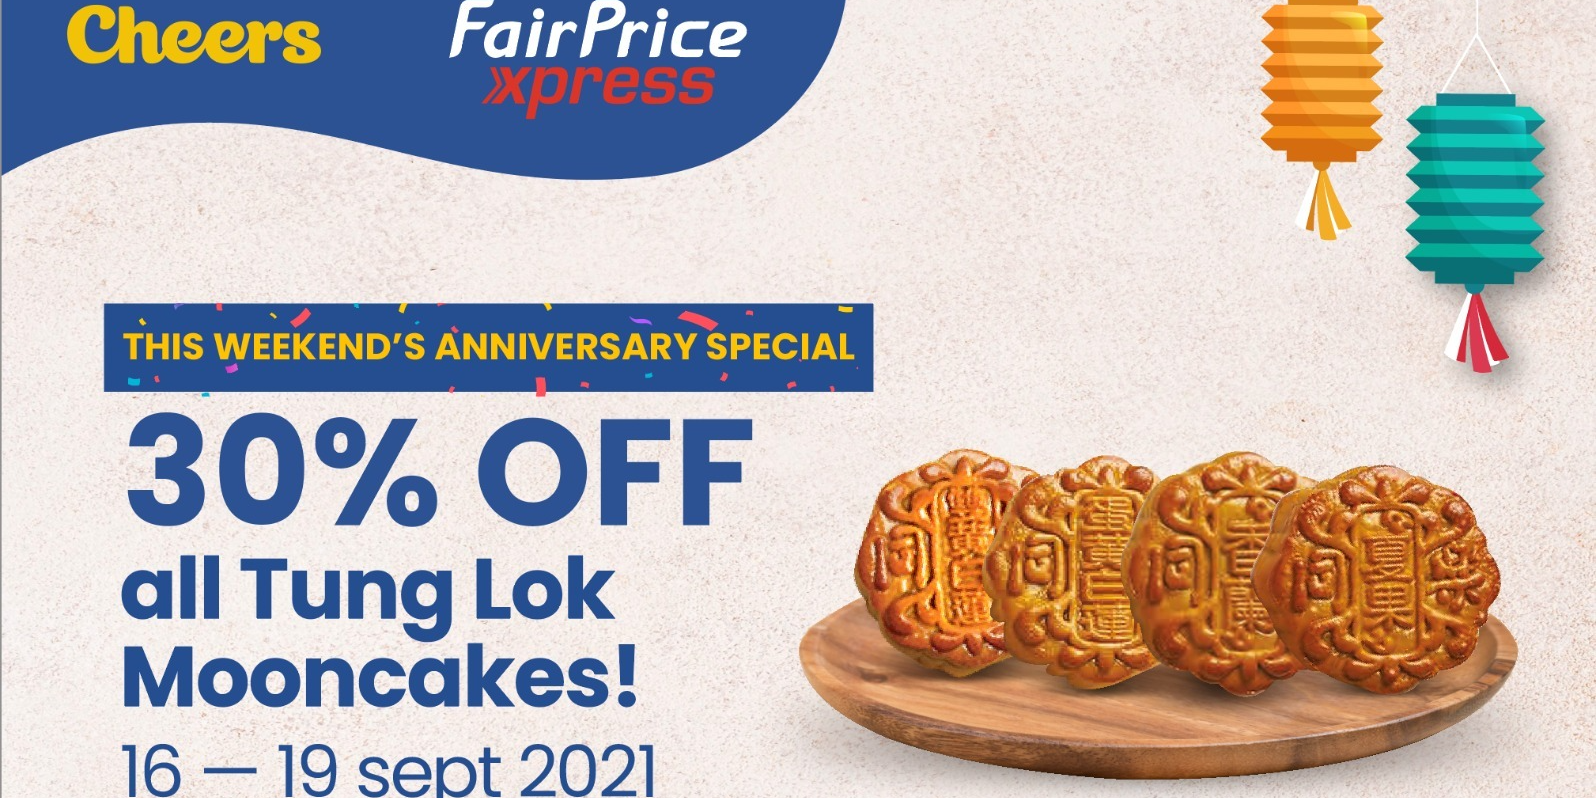 4 DAYS ONLY! Anniversary Special Mooncake Promotion at Cheers and FairPrice Xpress